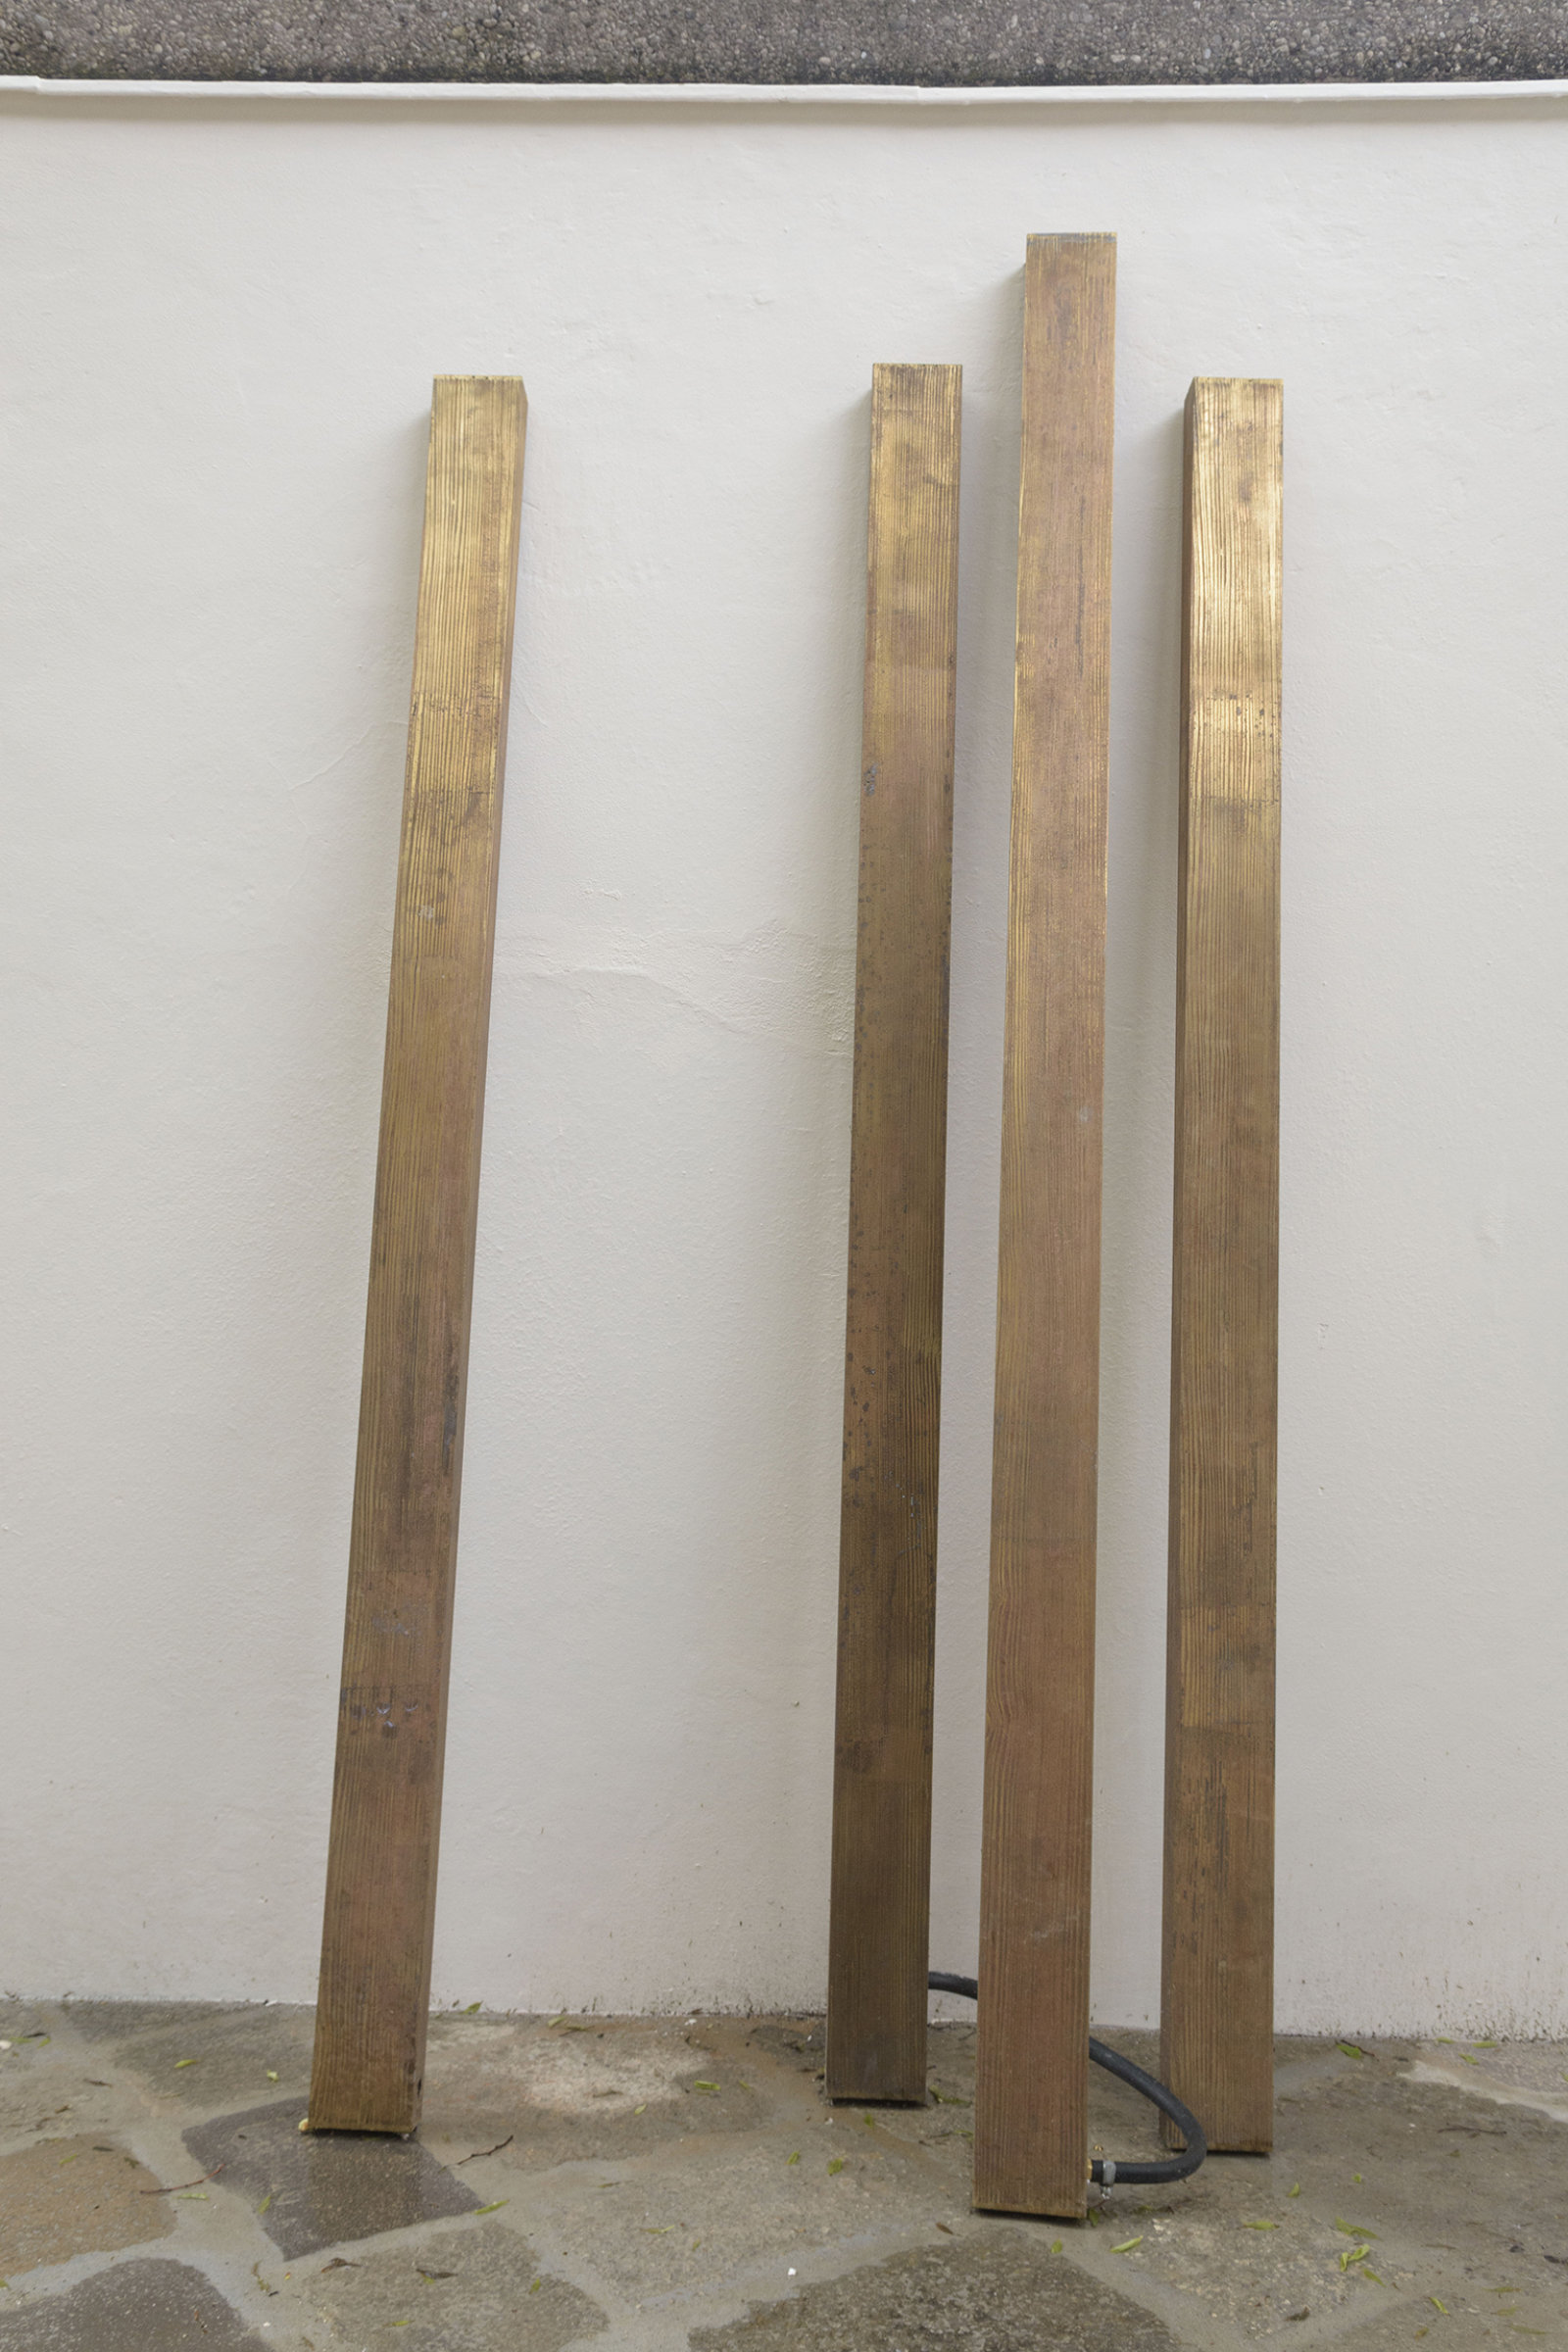 Geoffrey Farmer, Planks, 2017, acid etched brass, water works, each 2 x 4 x 76 in. (5 x 10 x 200 cm). Installation view, A way out of the mirror, Canada Pavilion, 57th Venice Biennale, Venice, Italy